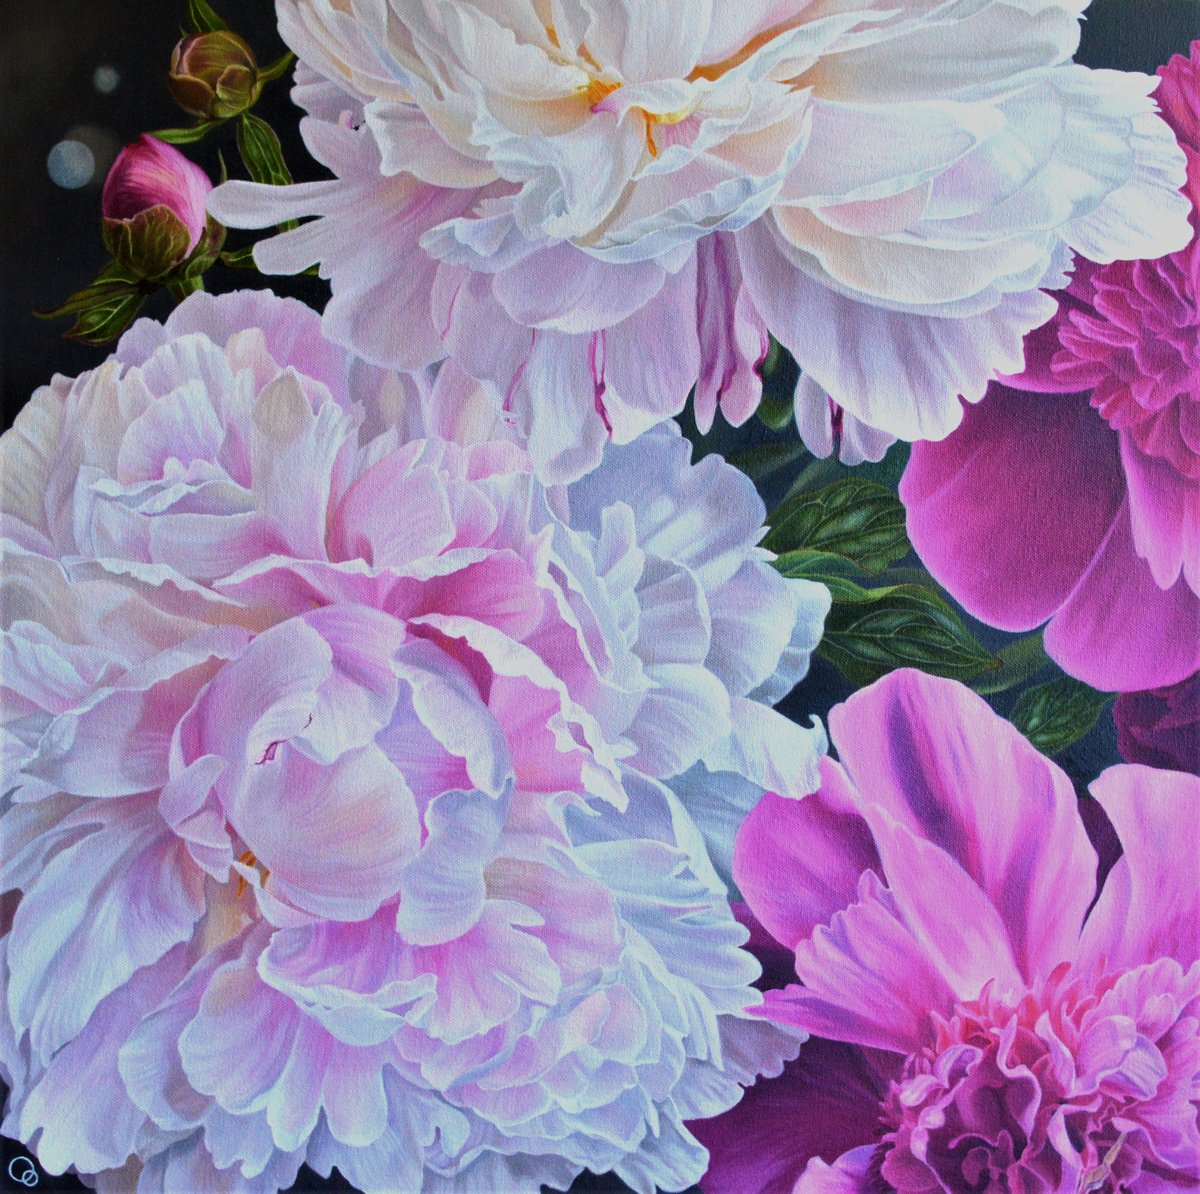 Fleeting Moment - Peonies Floral Oil Painting by Veronique Oodian